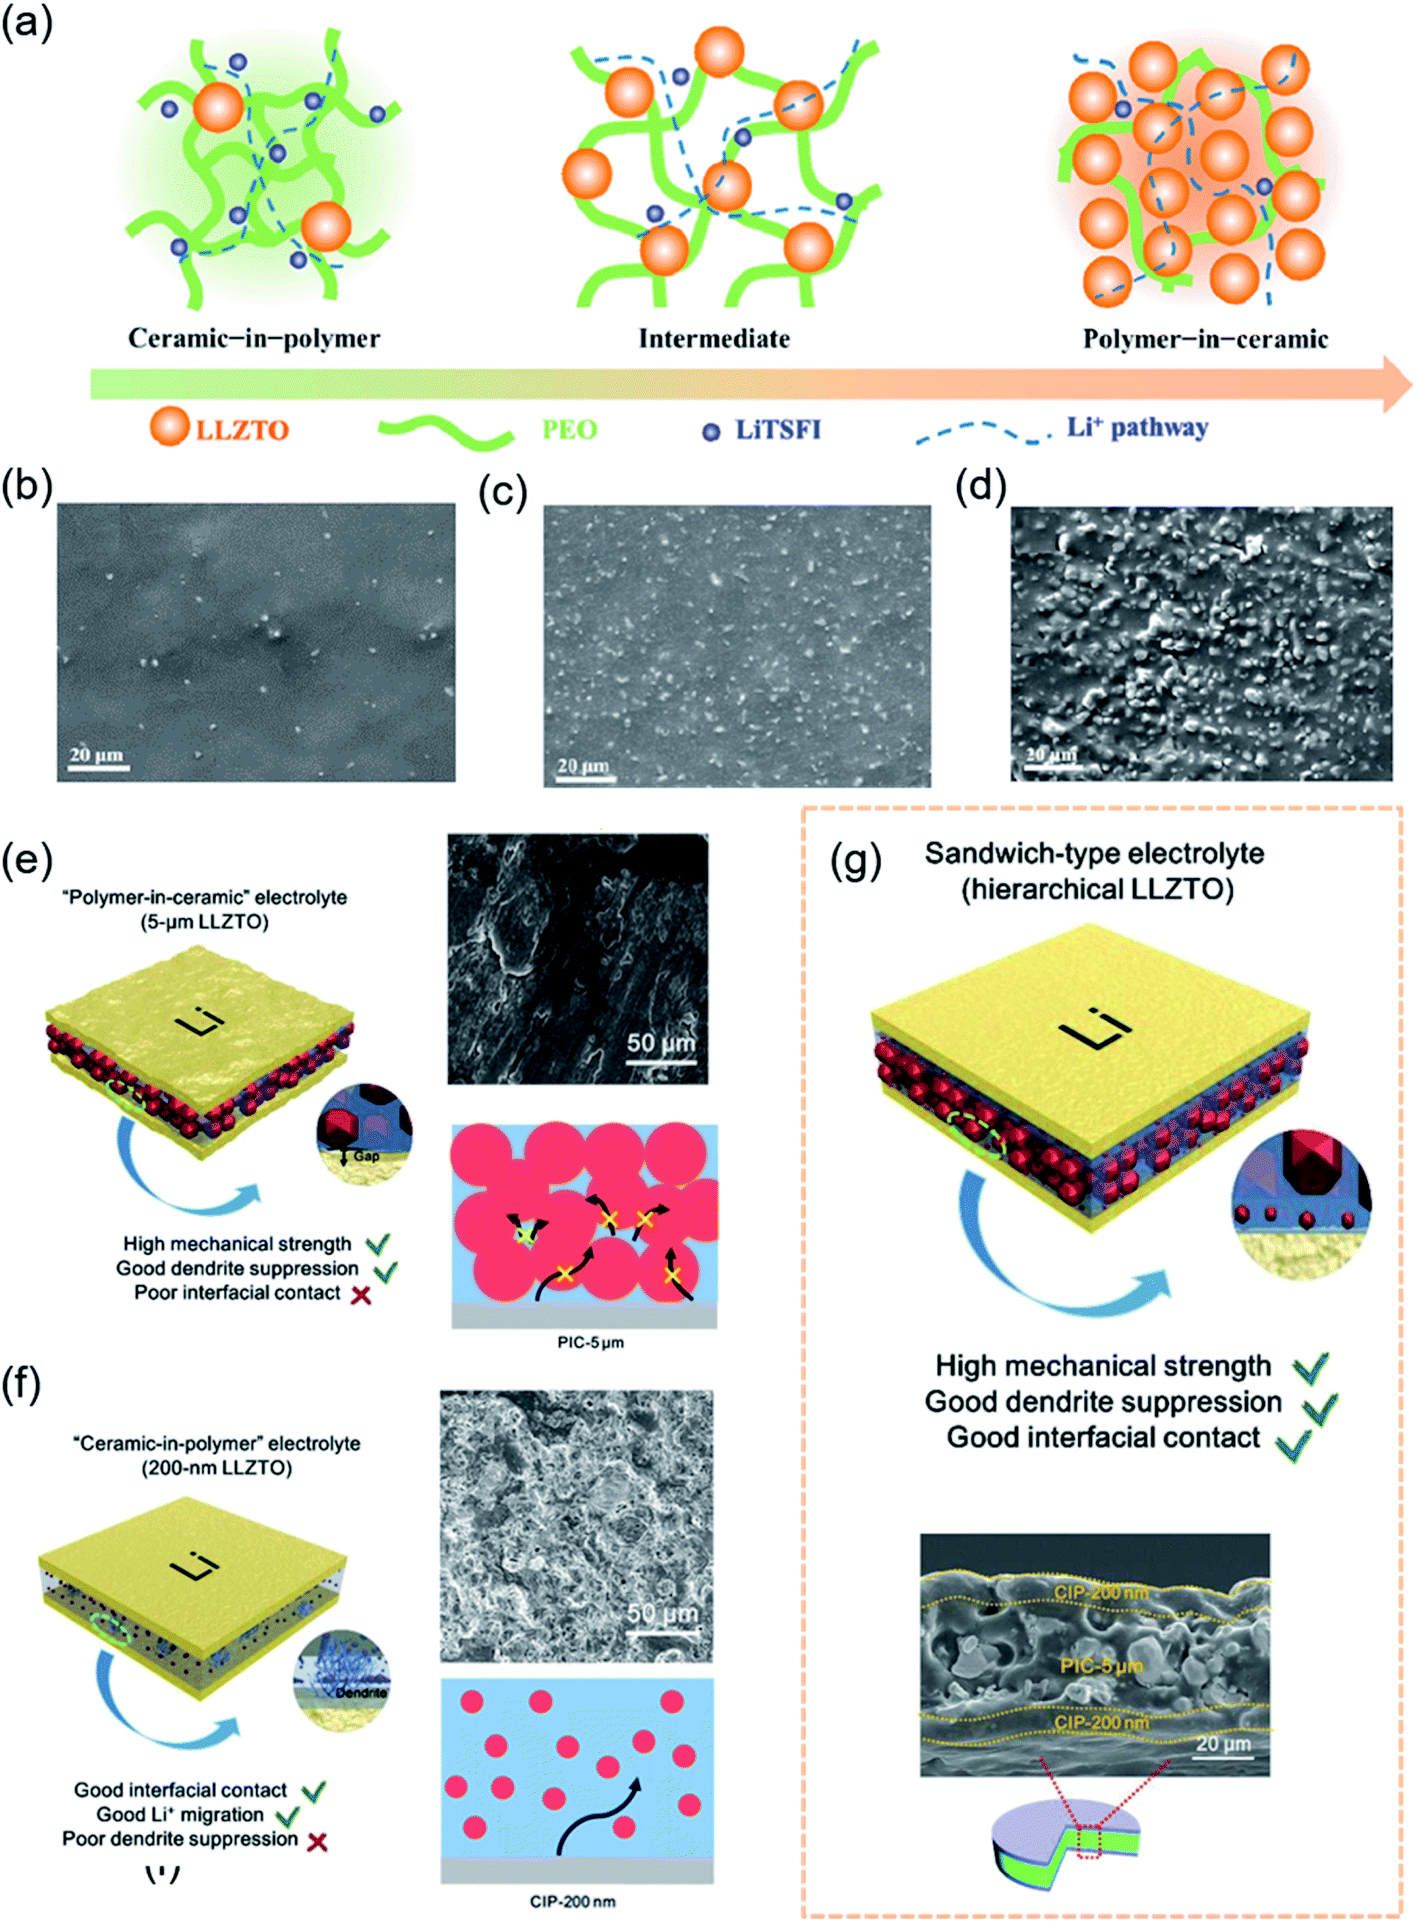 Designing Composite Solid State Electrolytes For High Performance Lithium Ion Or Lithium Metal Batteries Chemical Science Rsc Publishing Doi 10 1039 D0scf